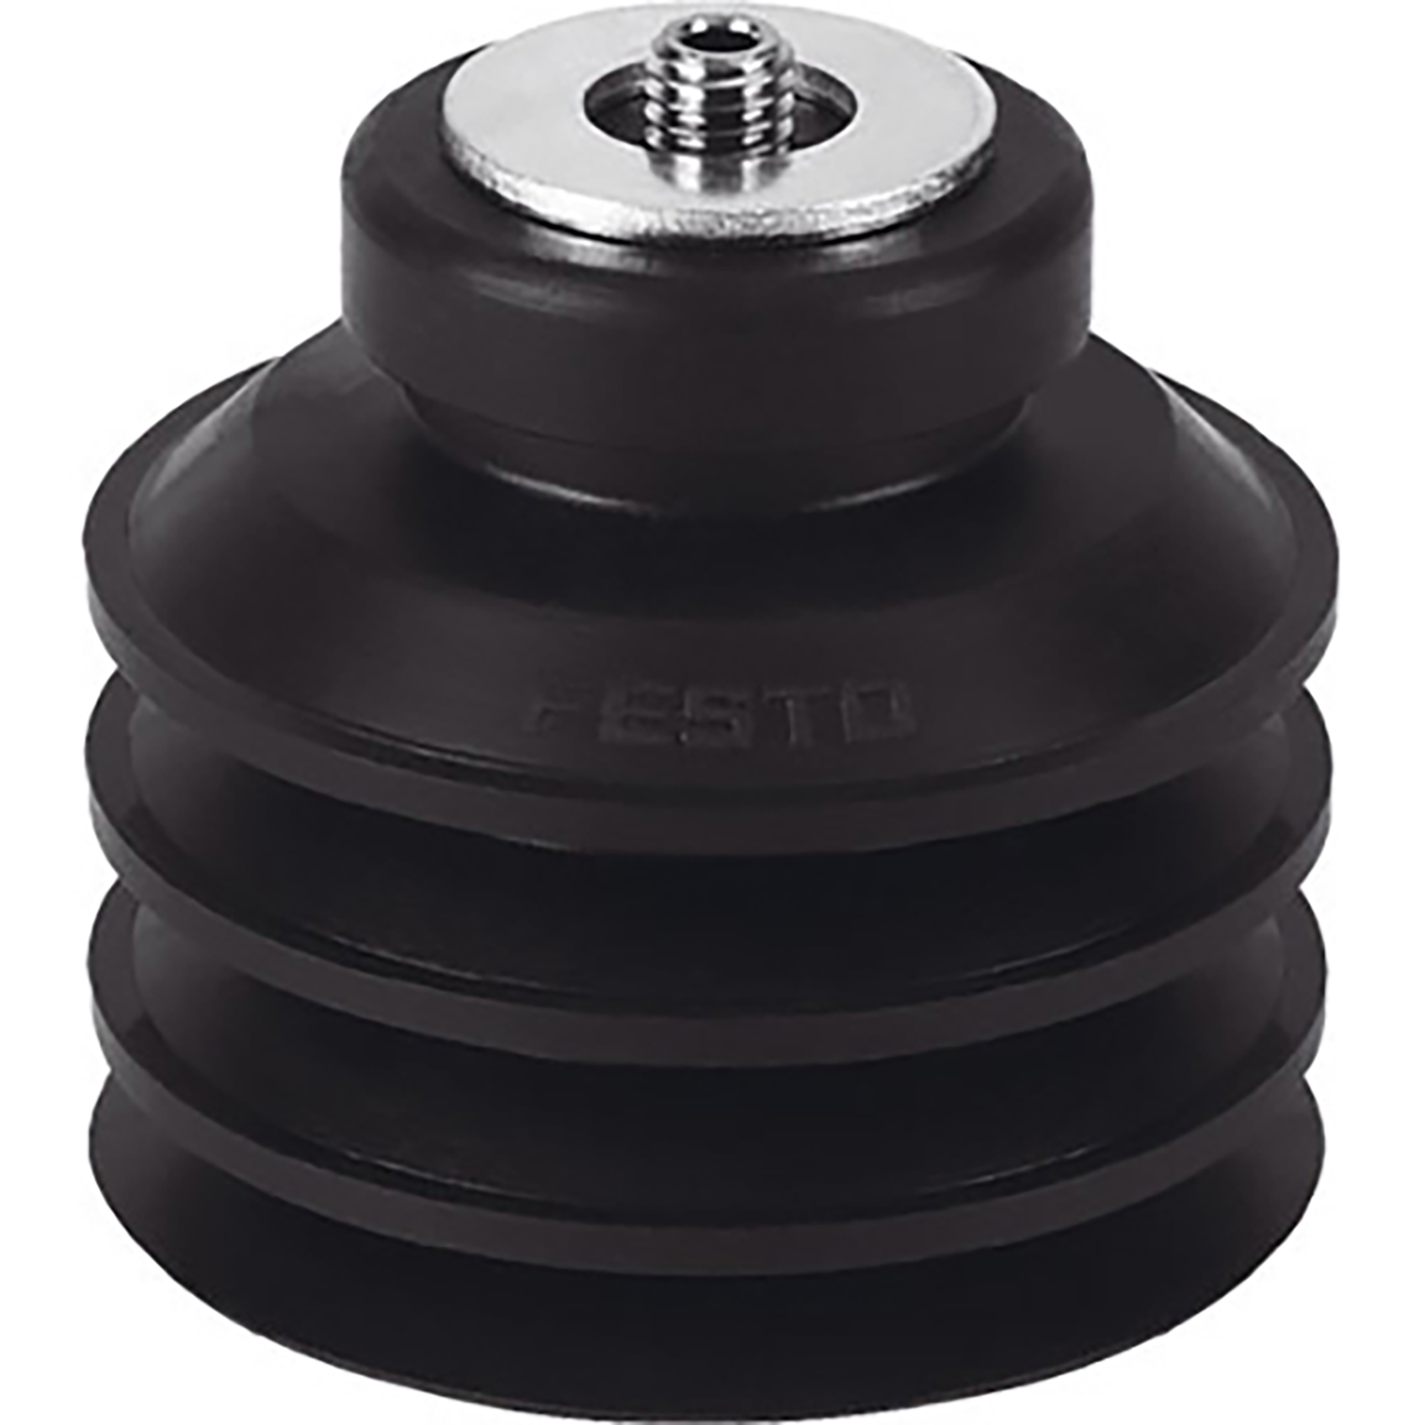 ESS-30-CS SUCTION CUP